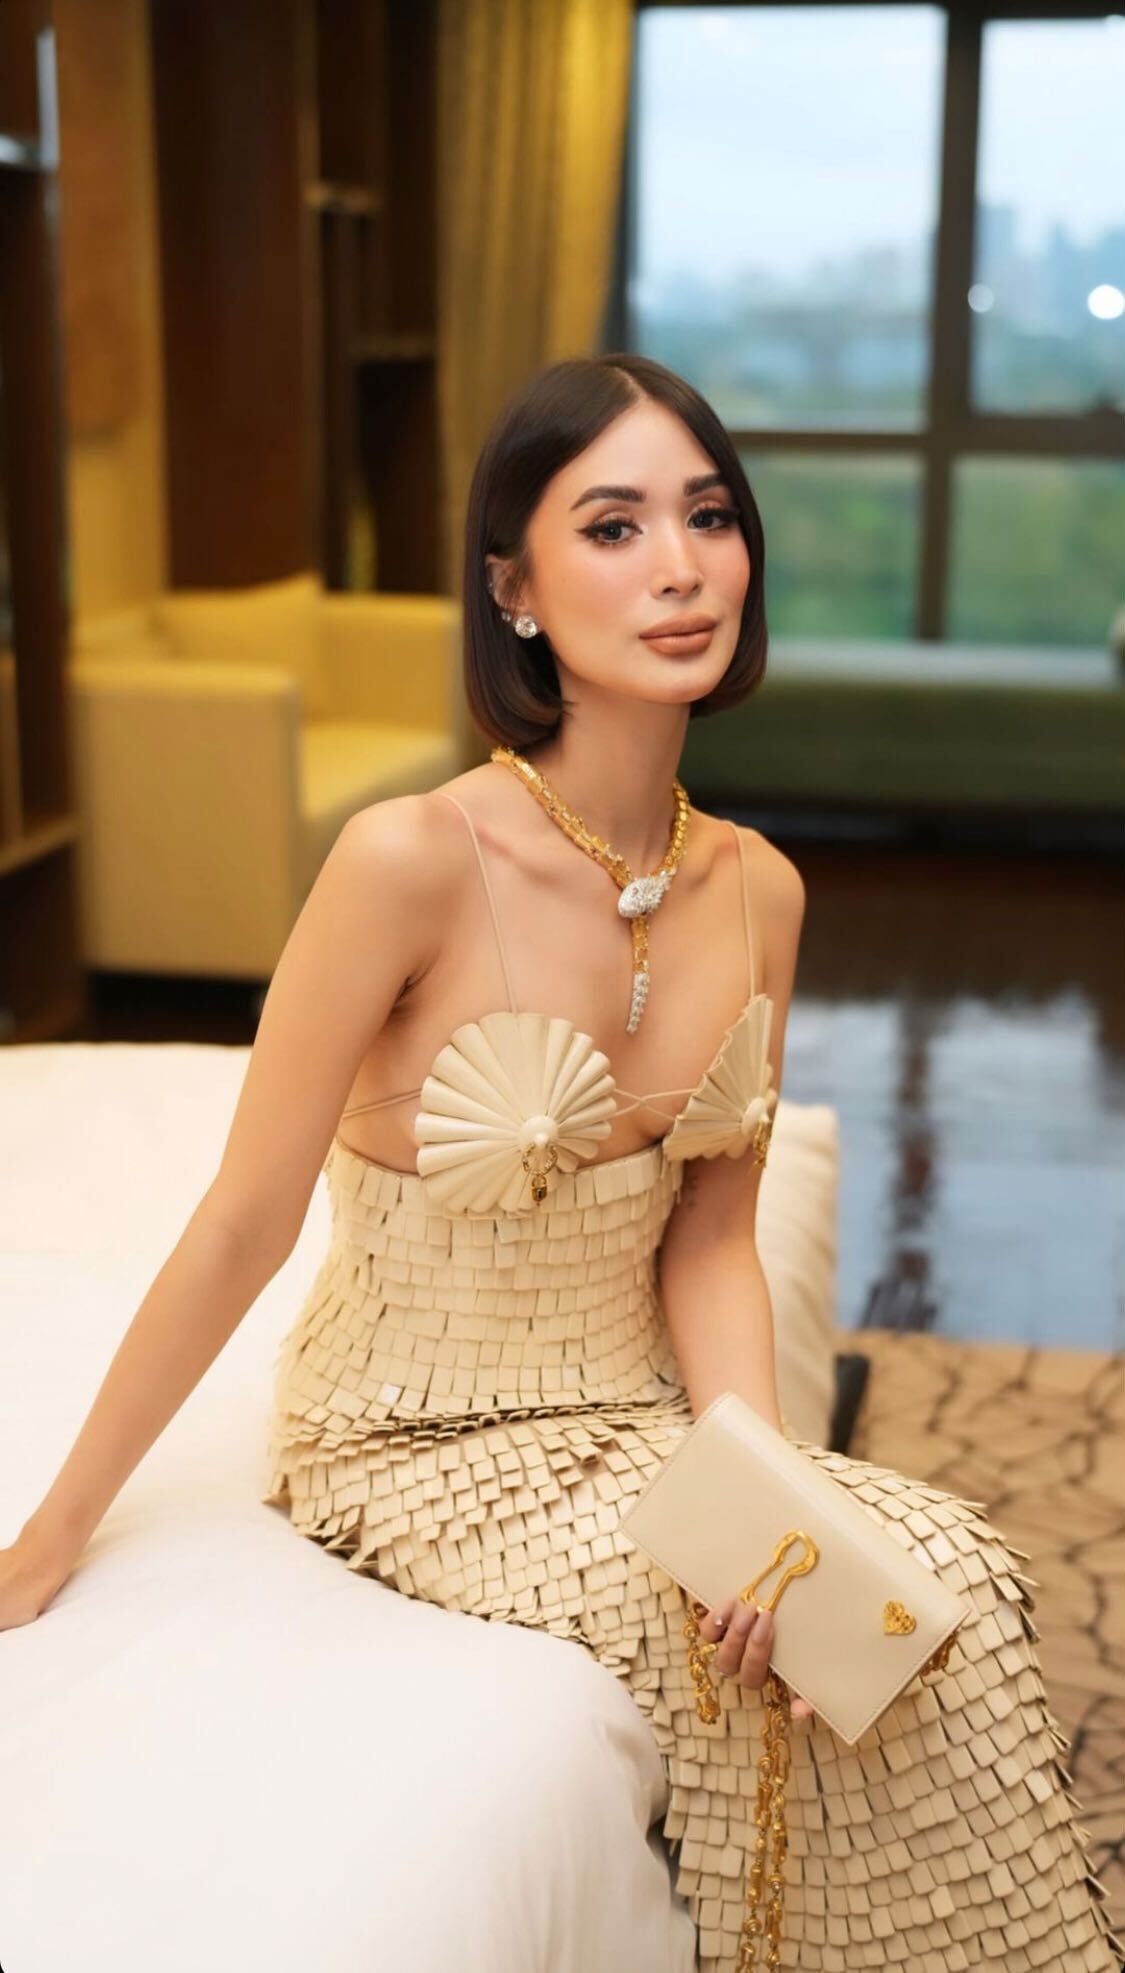 Heart Evangelista's head-turning gown at the GMA Gala 2023 took 5 months to  make